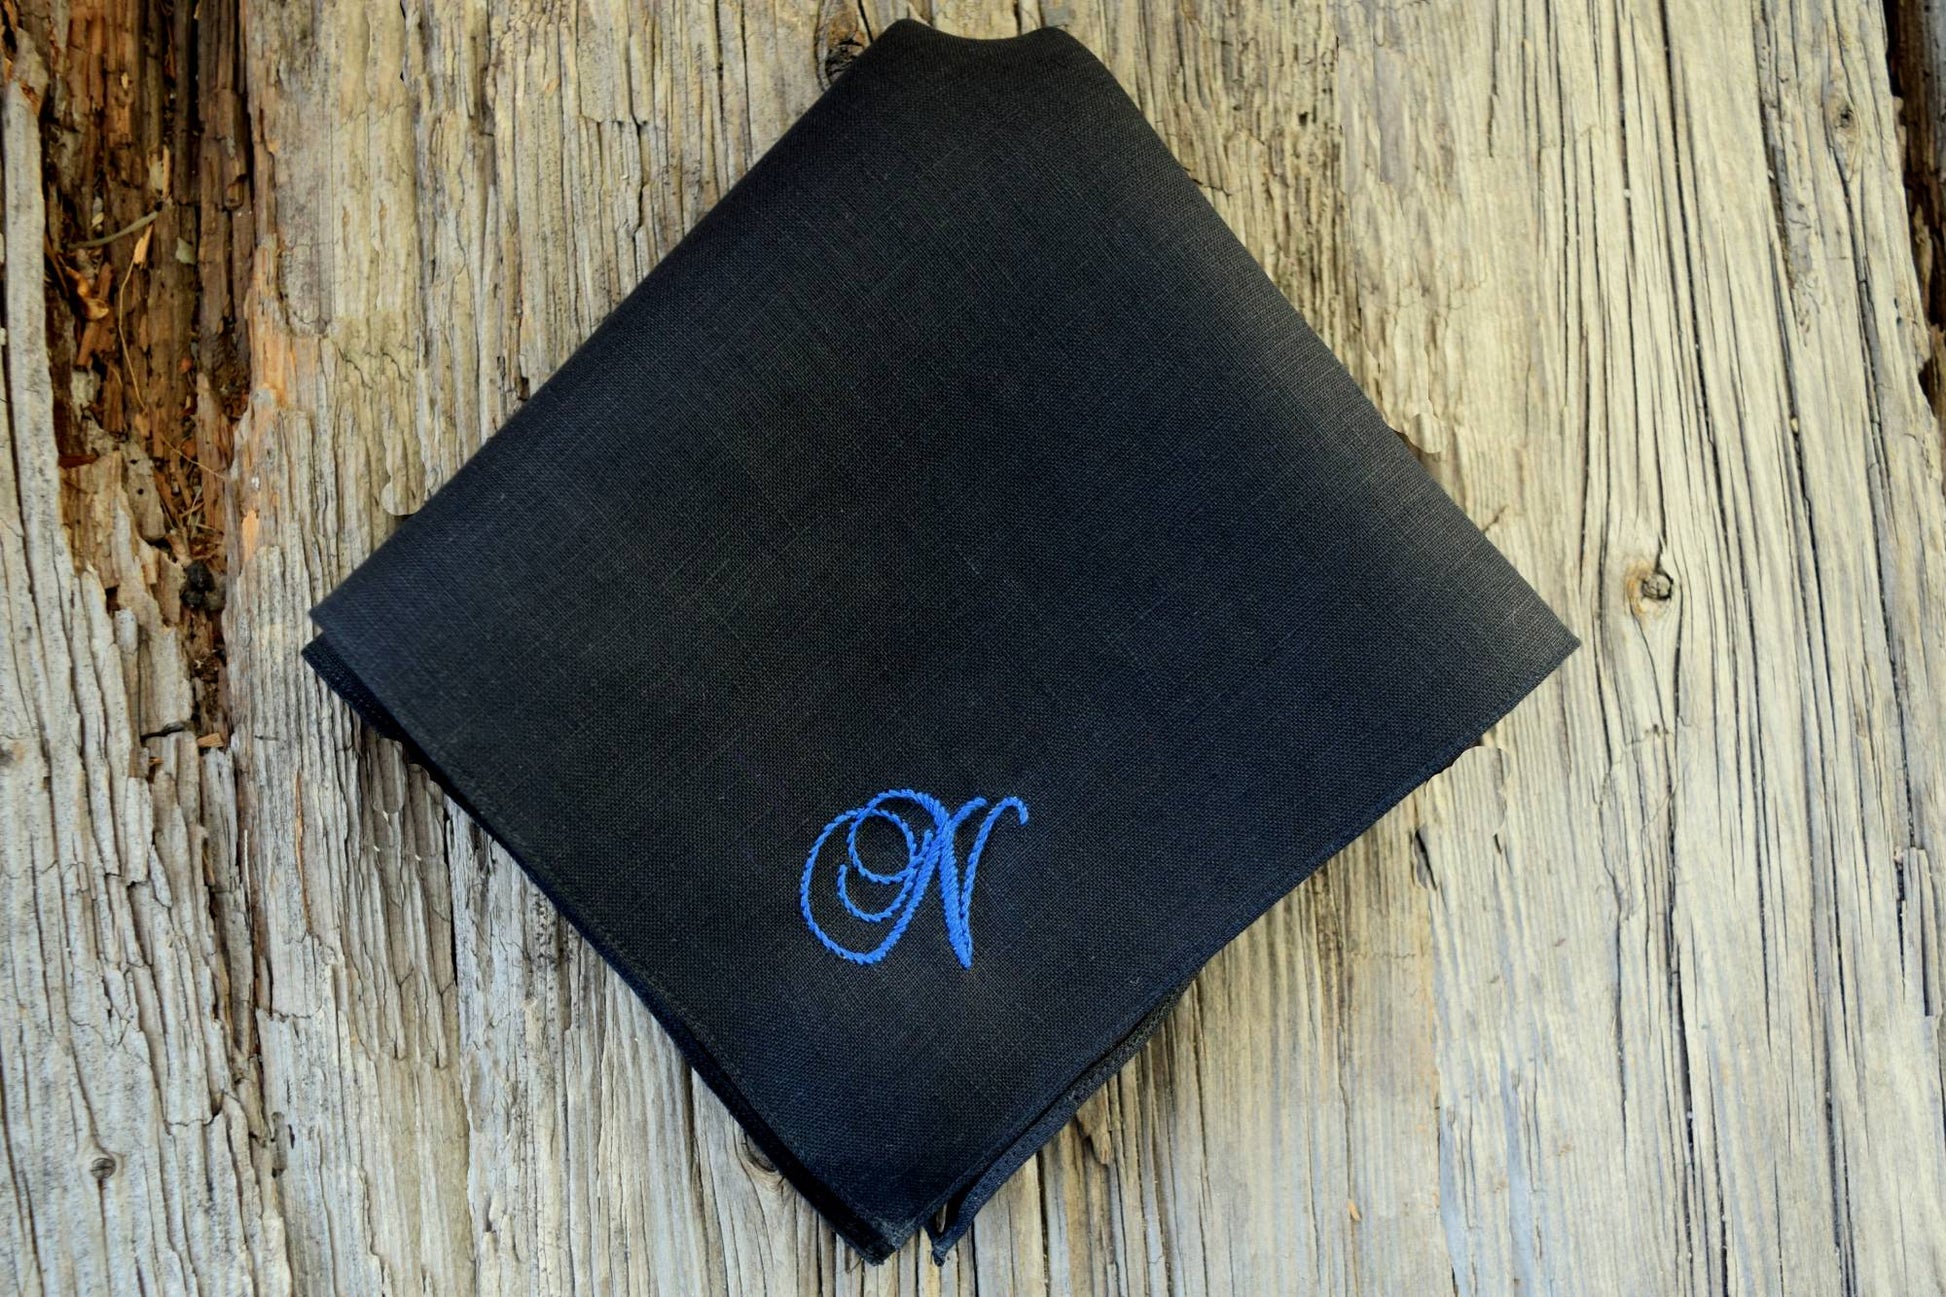 Black linen pocket square hand embroidered with a blue N in a classic script